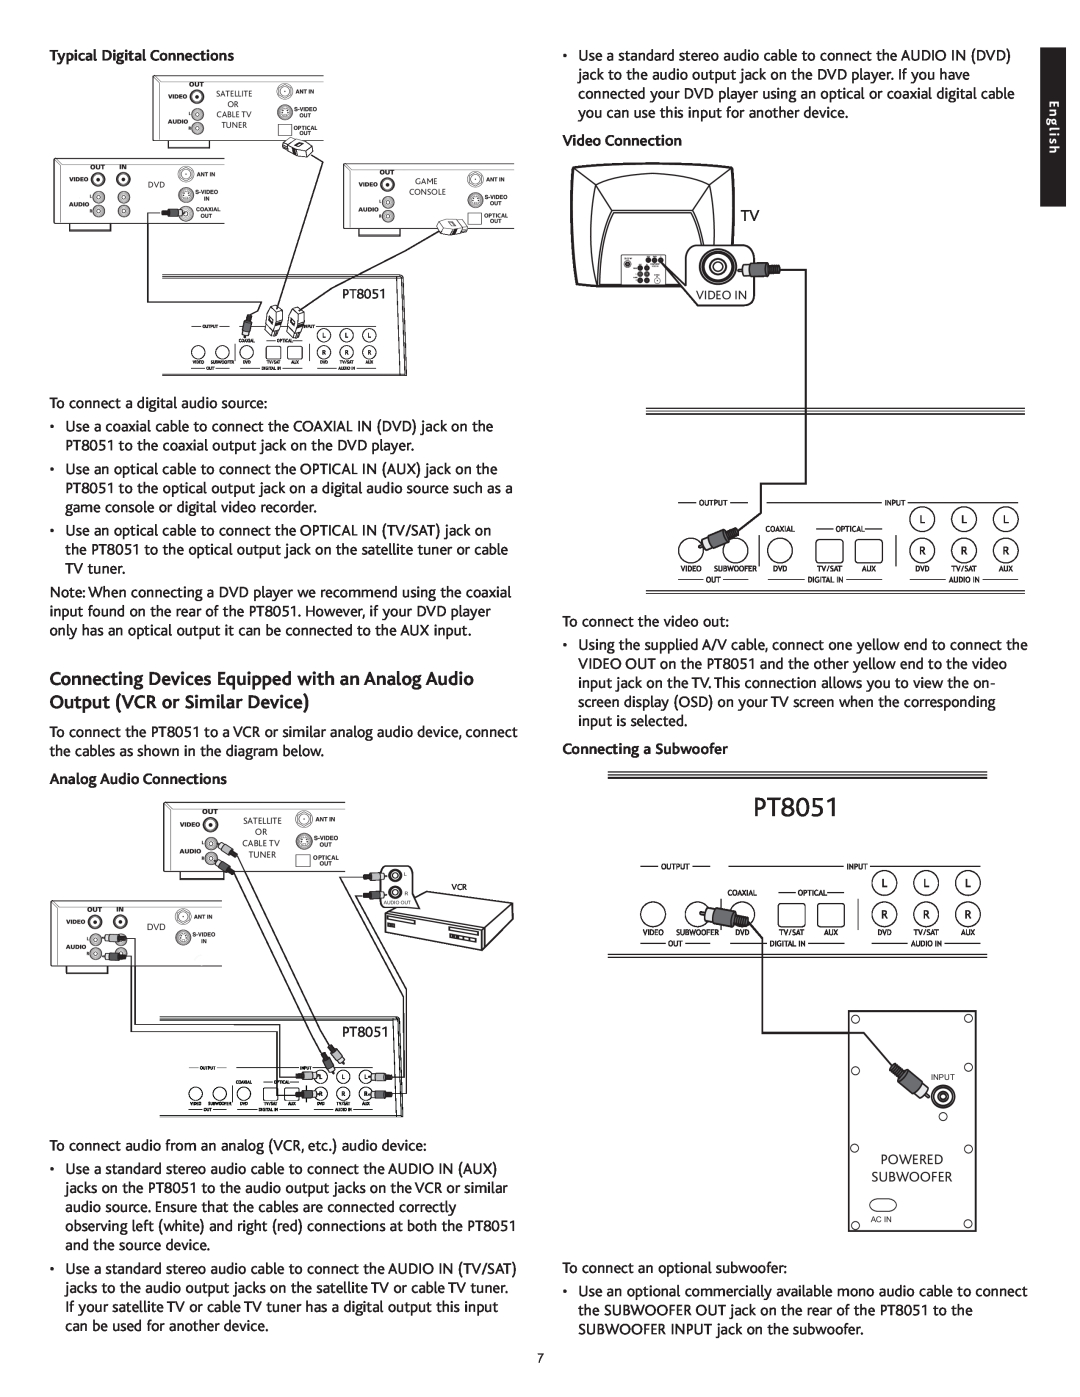 Altec Lansing PT8051 manual Typical Digital Connections, you can use this input for another device, Video Connection 